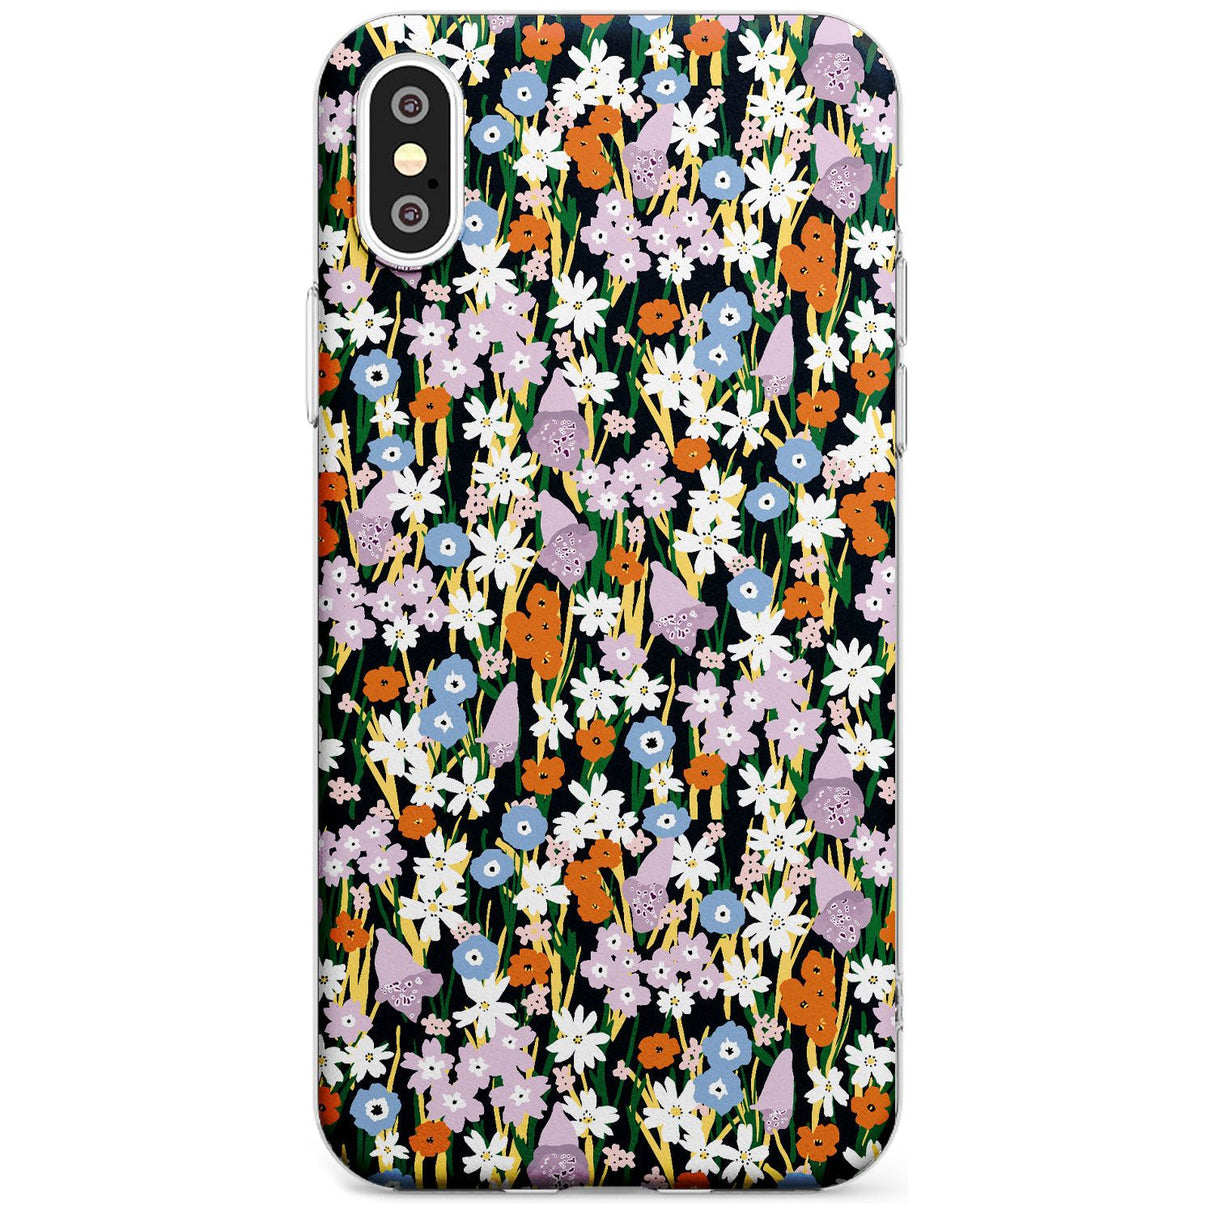 Energetic Floral Mix: Solid Black Impact Phone Case for iPhone X XS Max XR